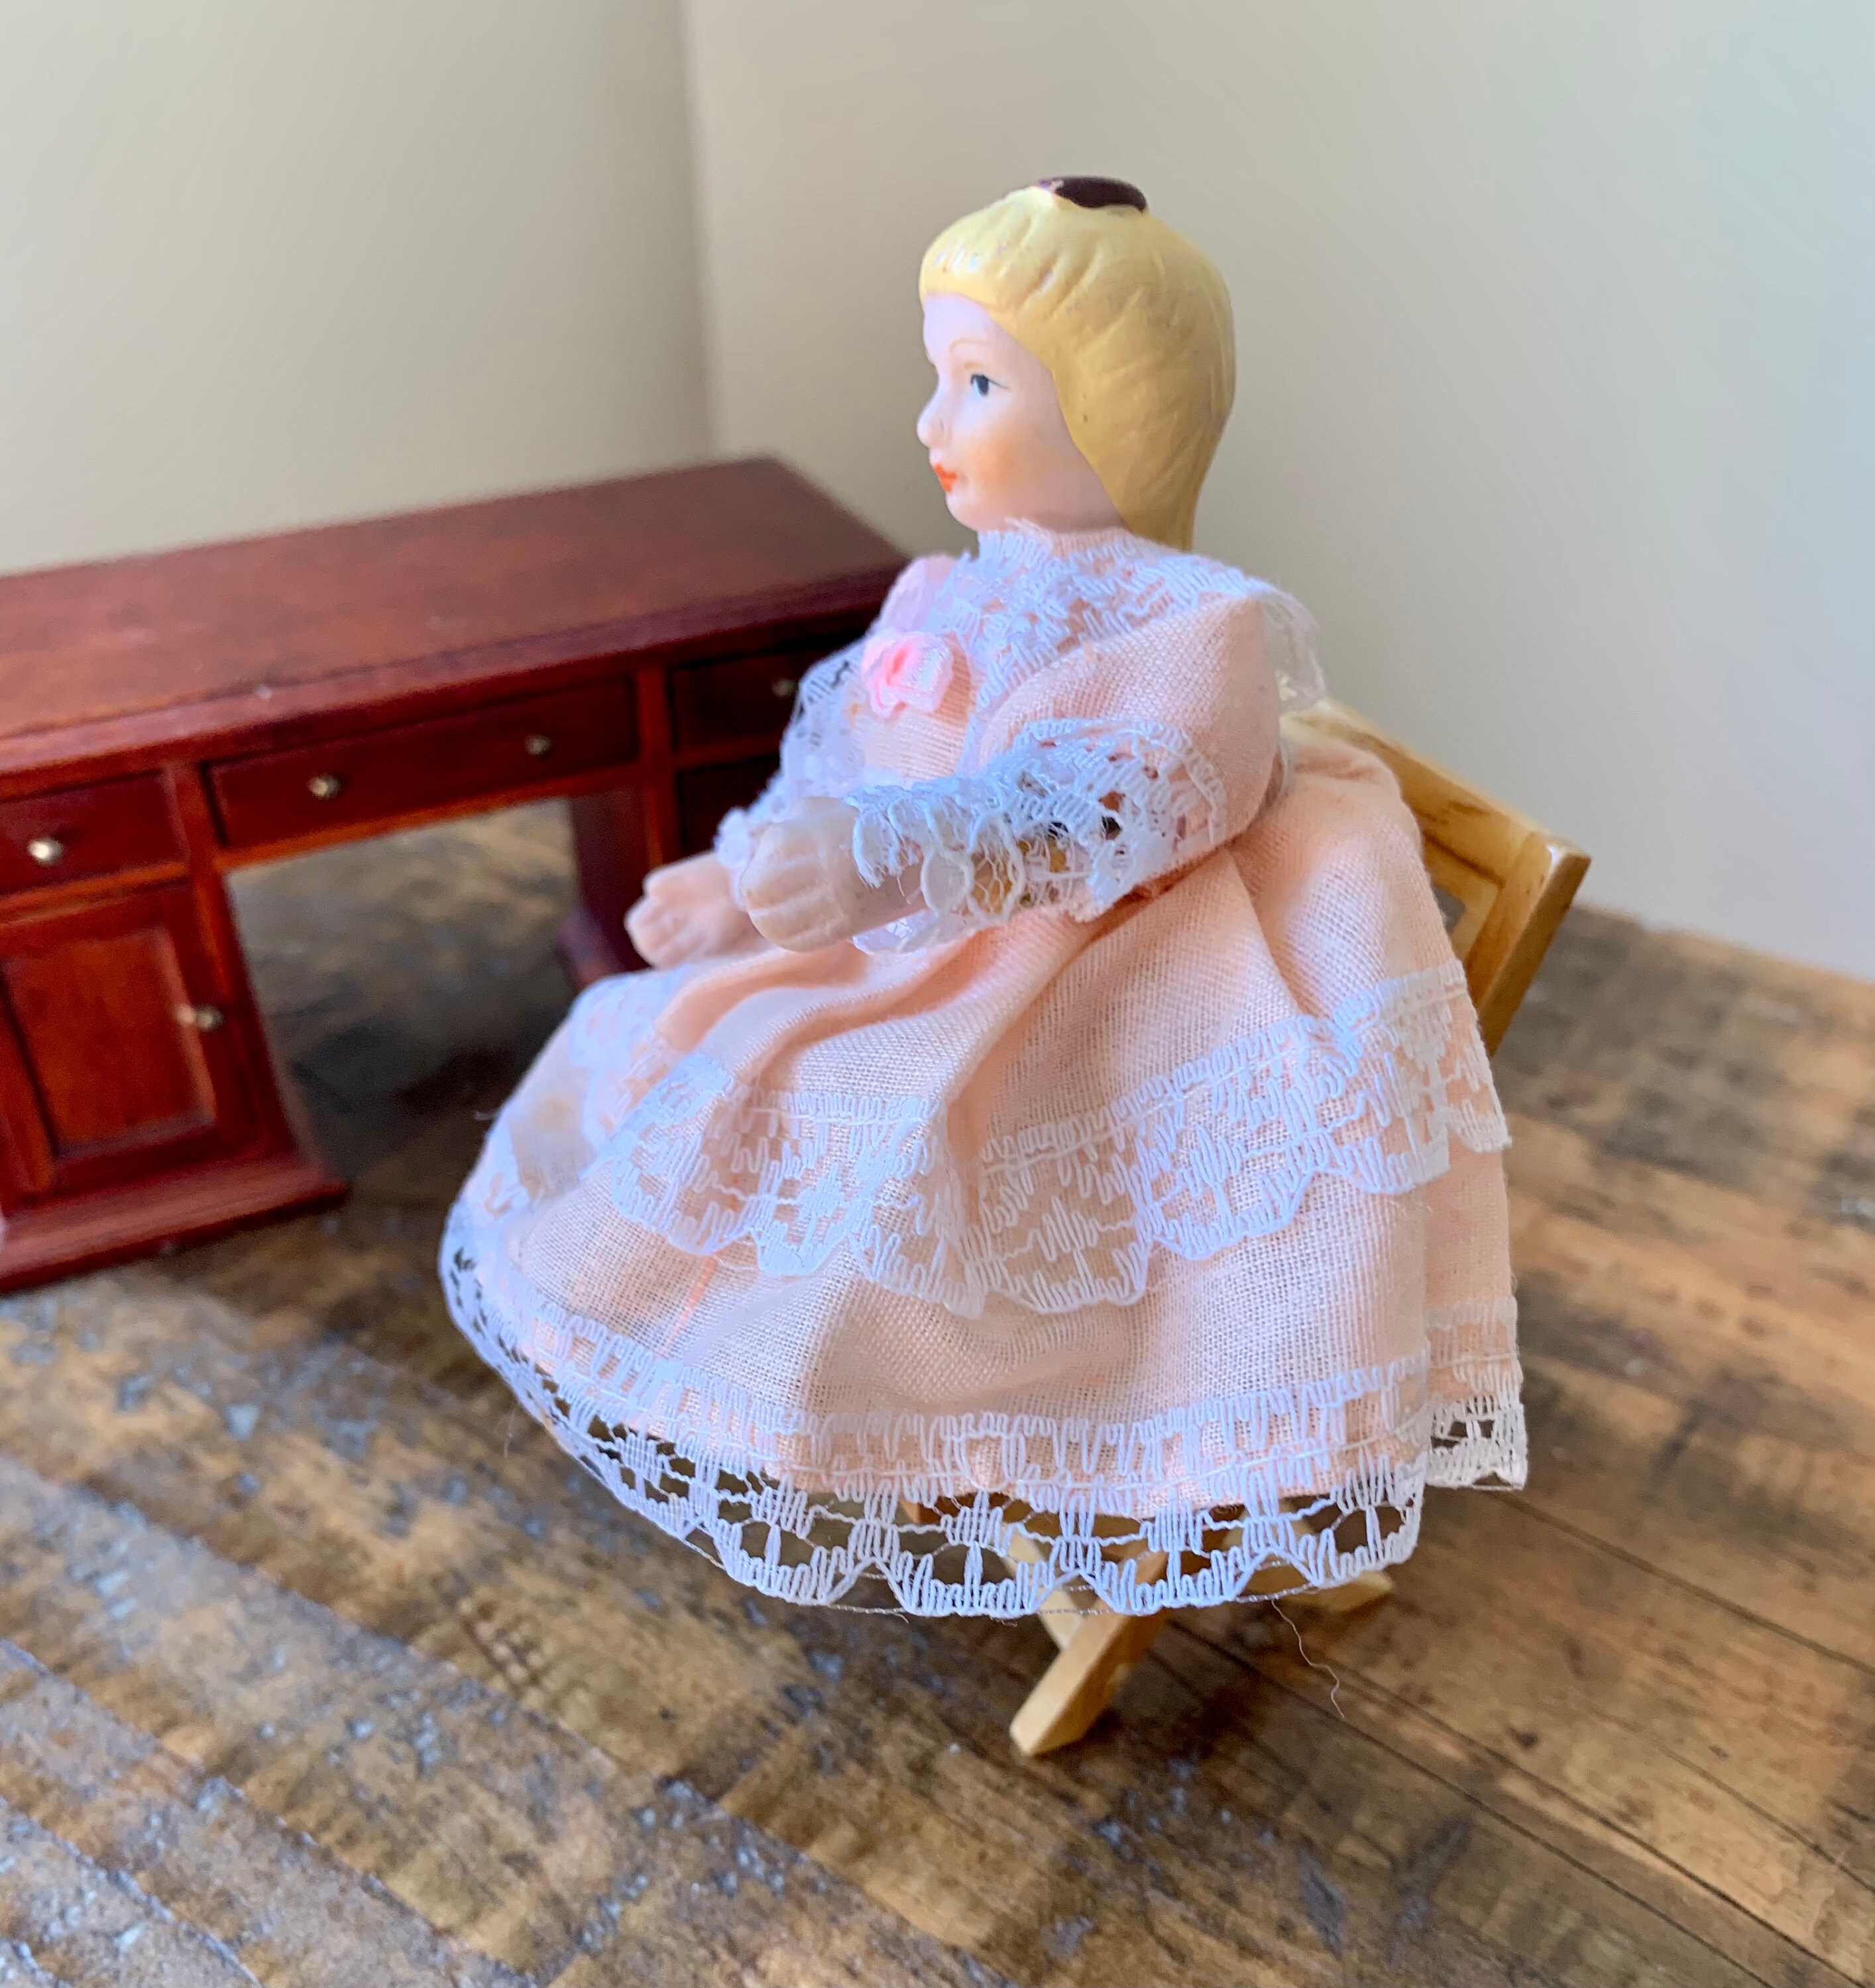 Vintage 1:12th Scale Victorian Dolls House Figurine Doll | Etsy